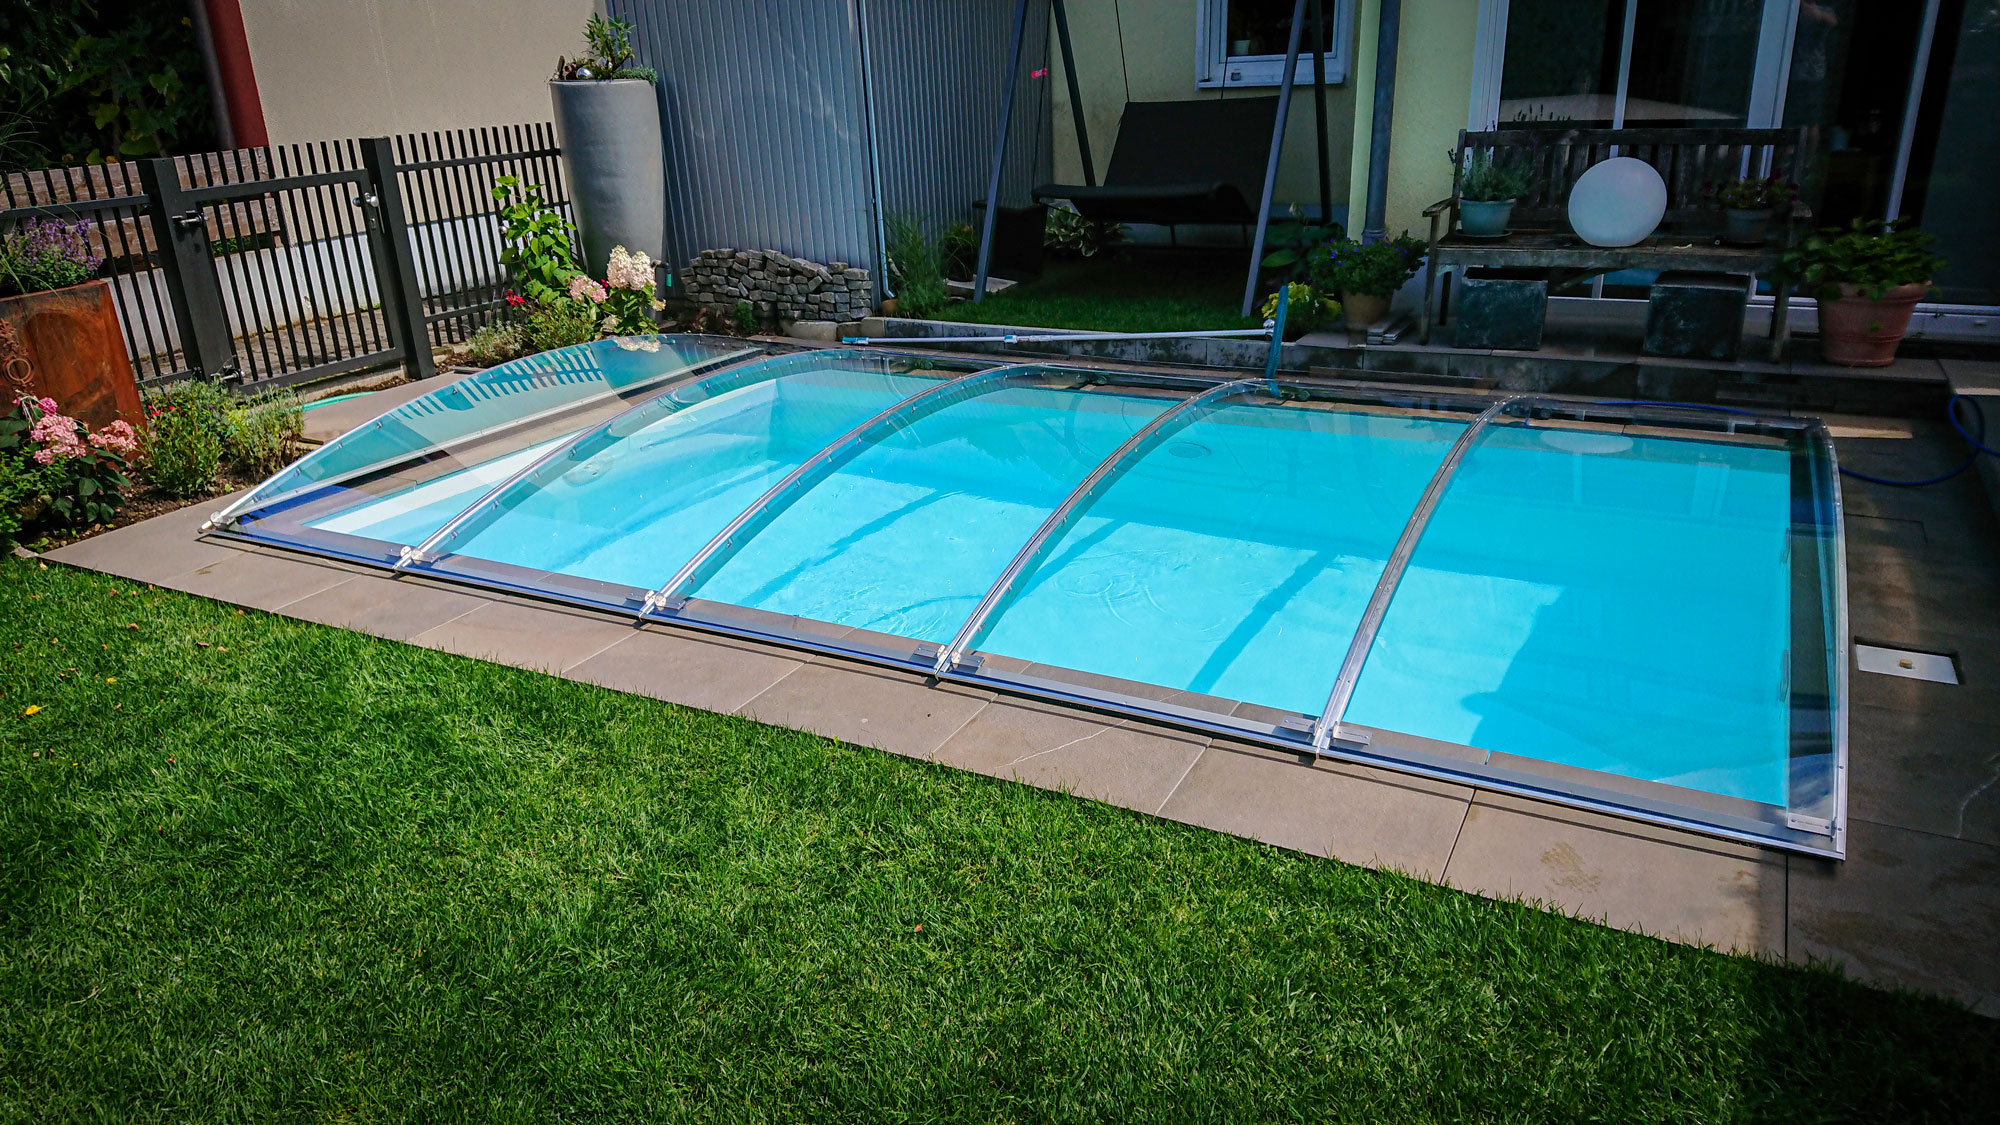 FlexiRoof PremiumPlus Clear - pool cover in high quality clear glass optics for the highest expectations